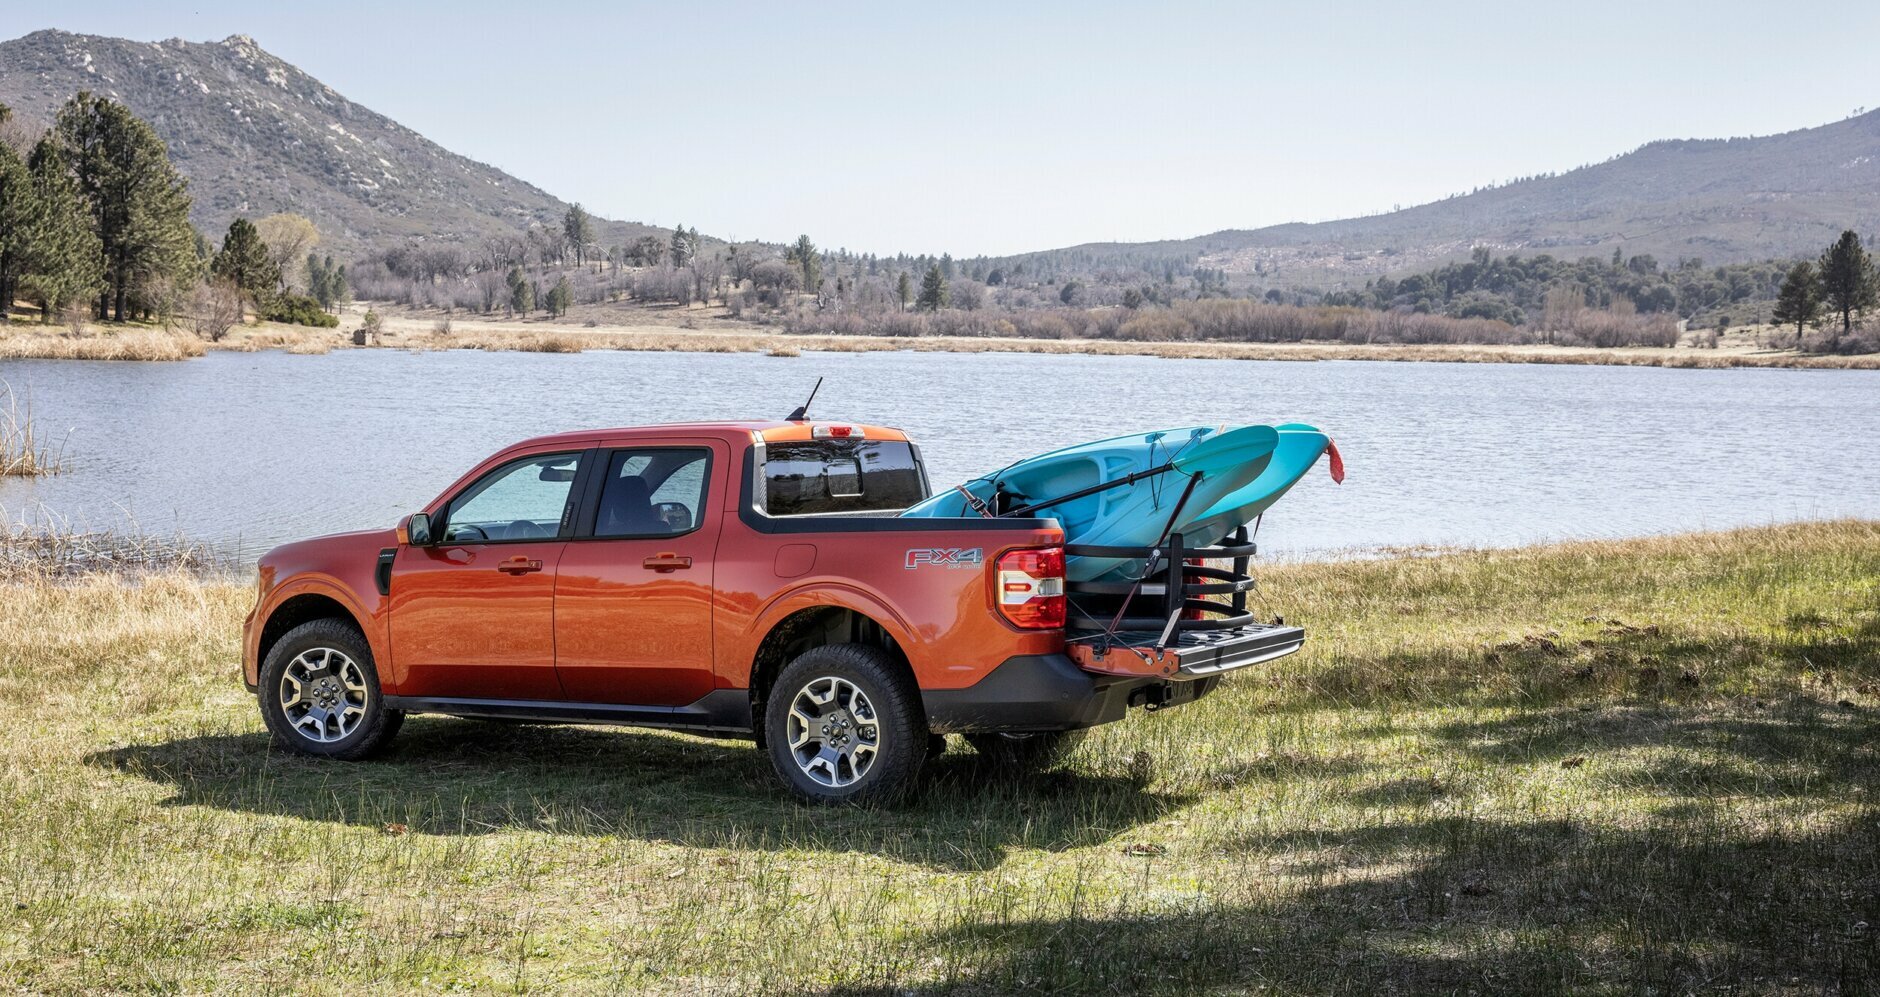 An optional bed extender makes it easier for the Ford Maverick to carry larger cargo.